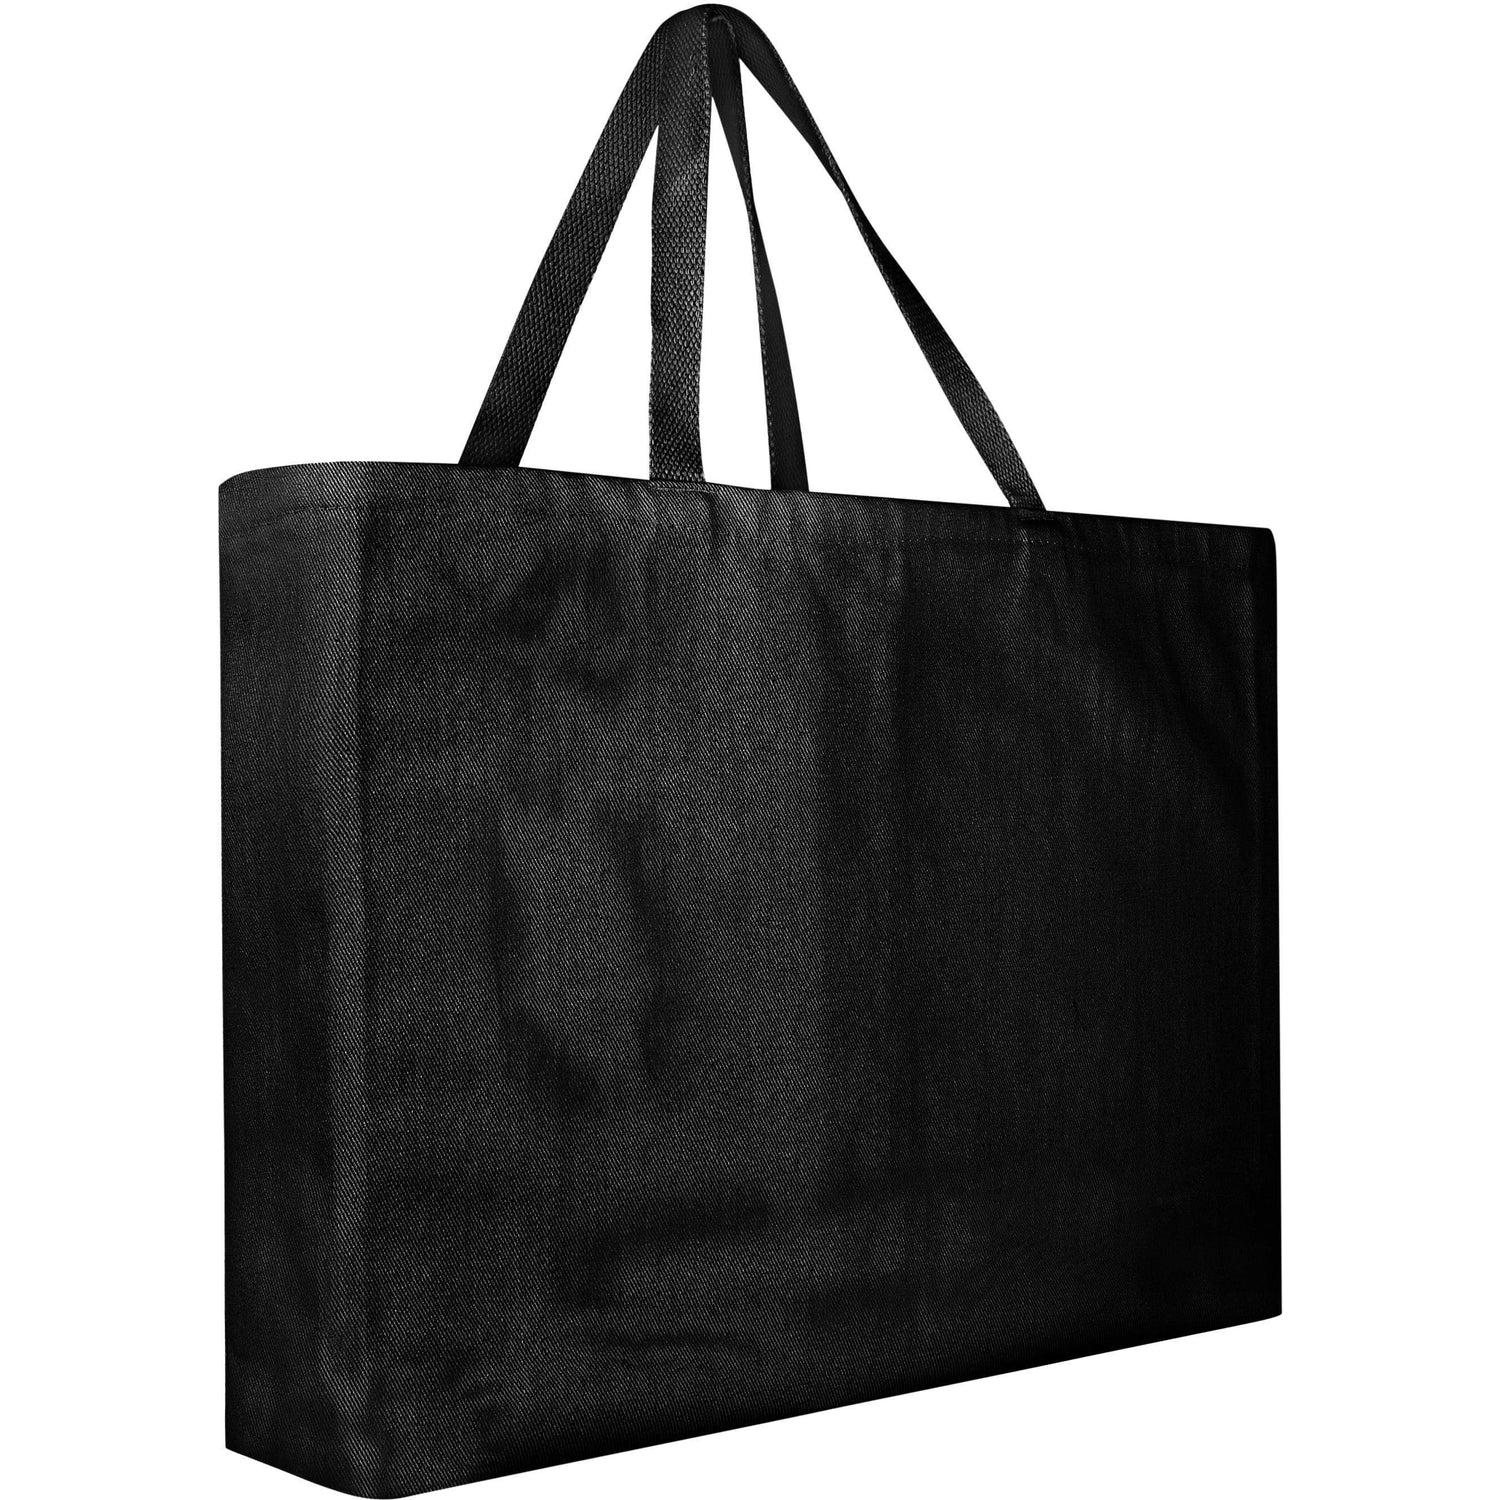 Wholesale Tote Bags, Large Cotton Twill Fabric Bags, Tote Bags Bulk – BagzDepot™